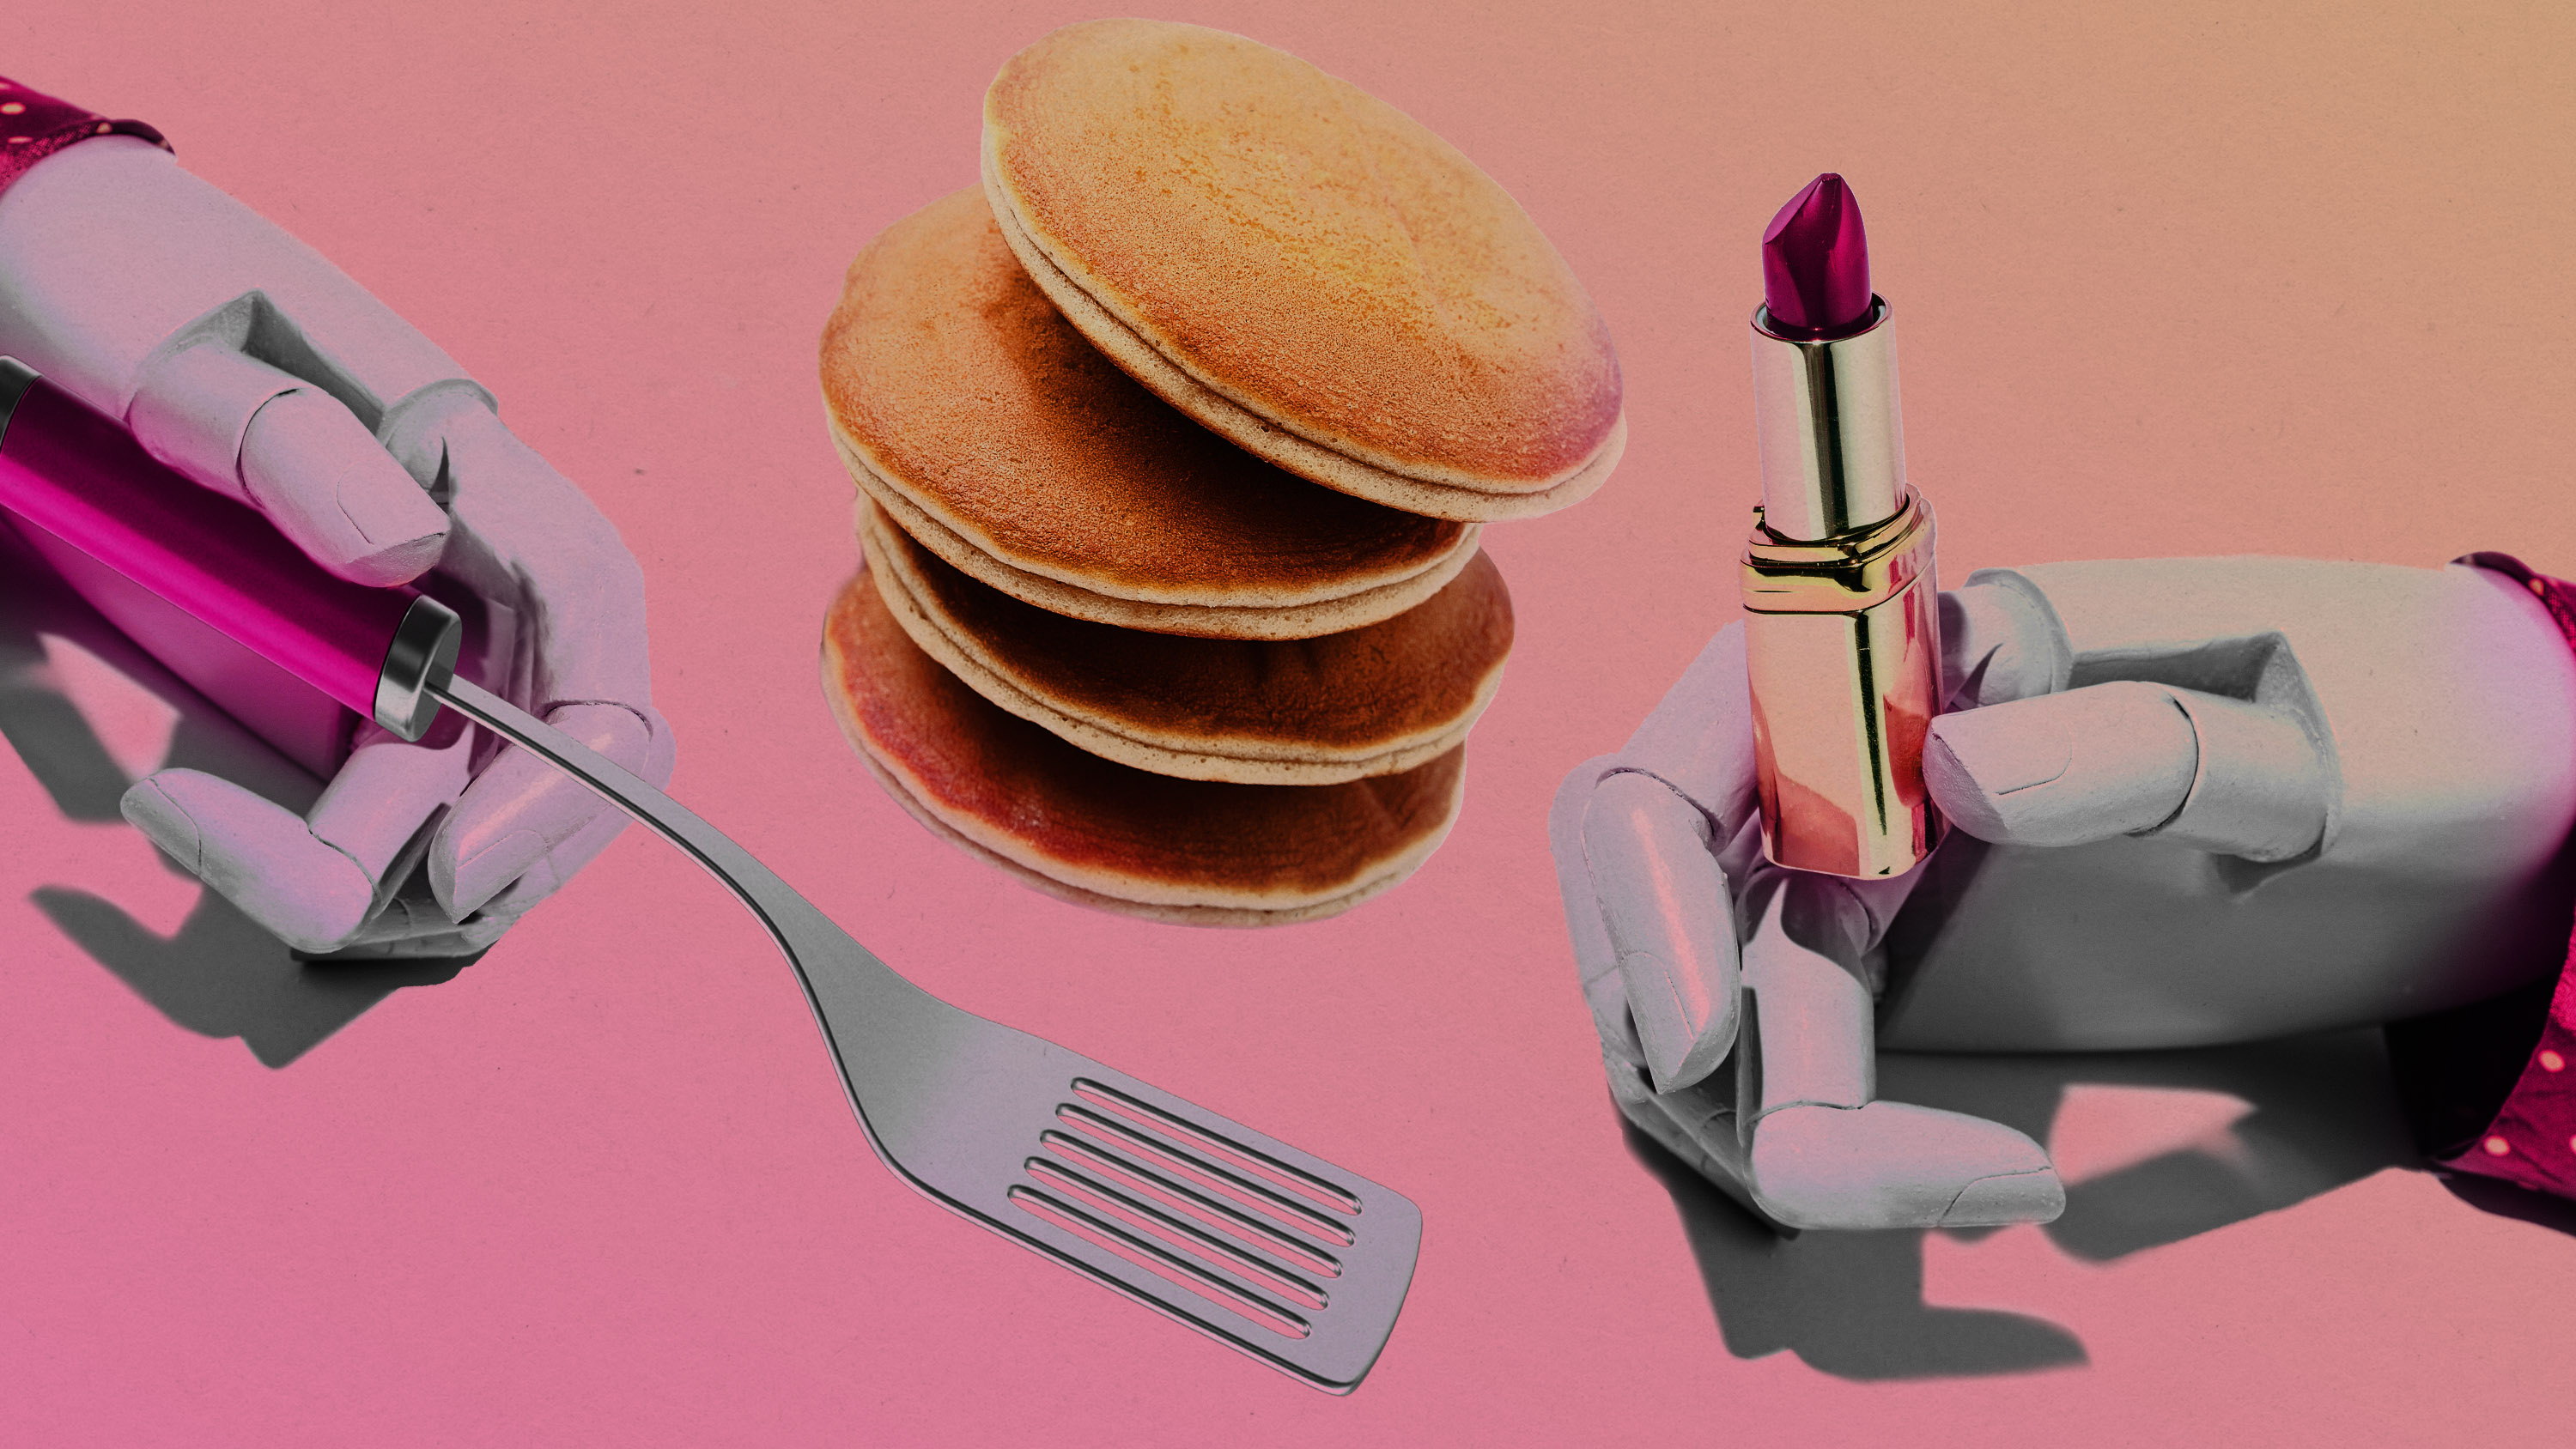 robot hands flipping pancakes and holding a tube of lipstick